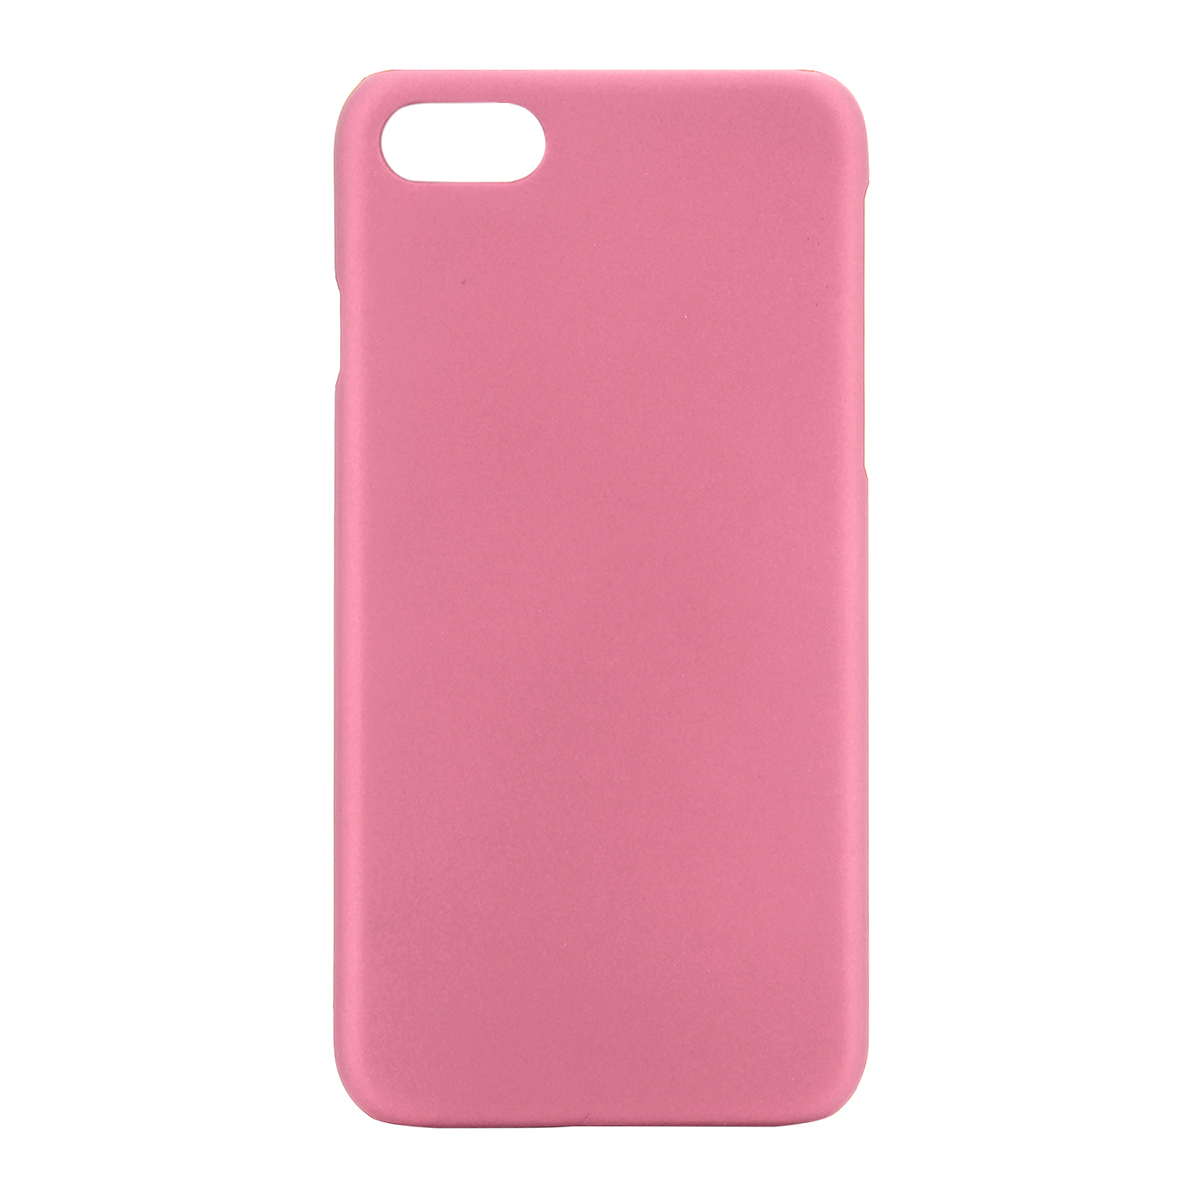 Multicolor Frosted Hard PC Protective Back Phone Case for iPhone 6s - Pink